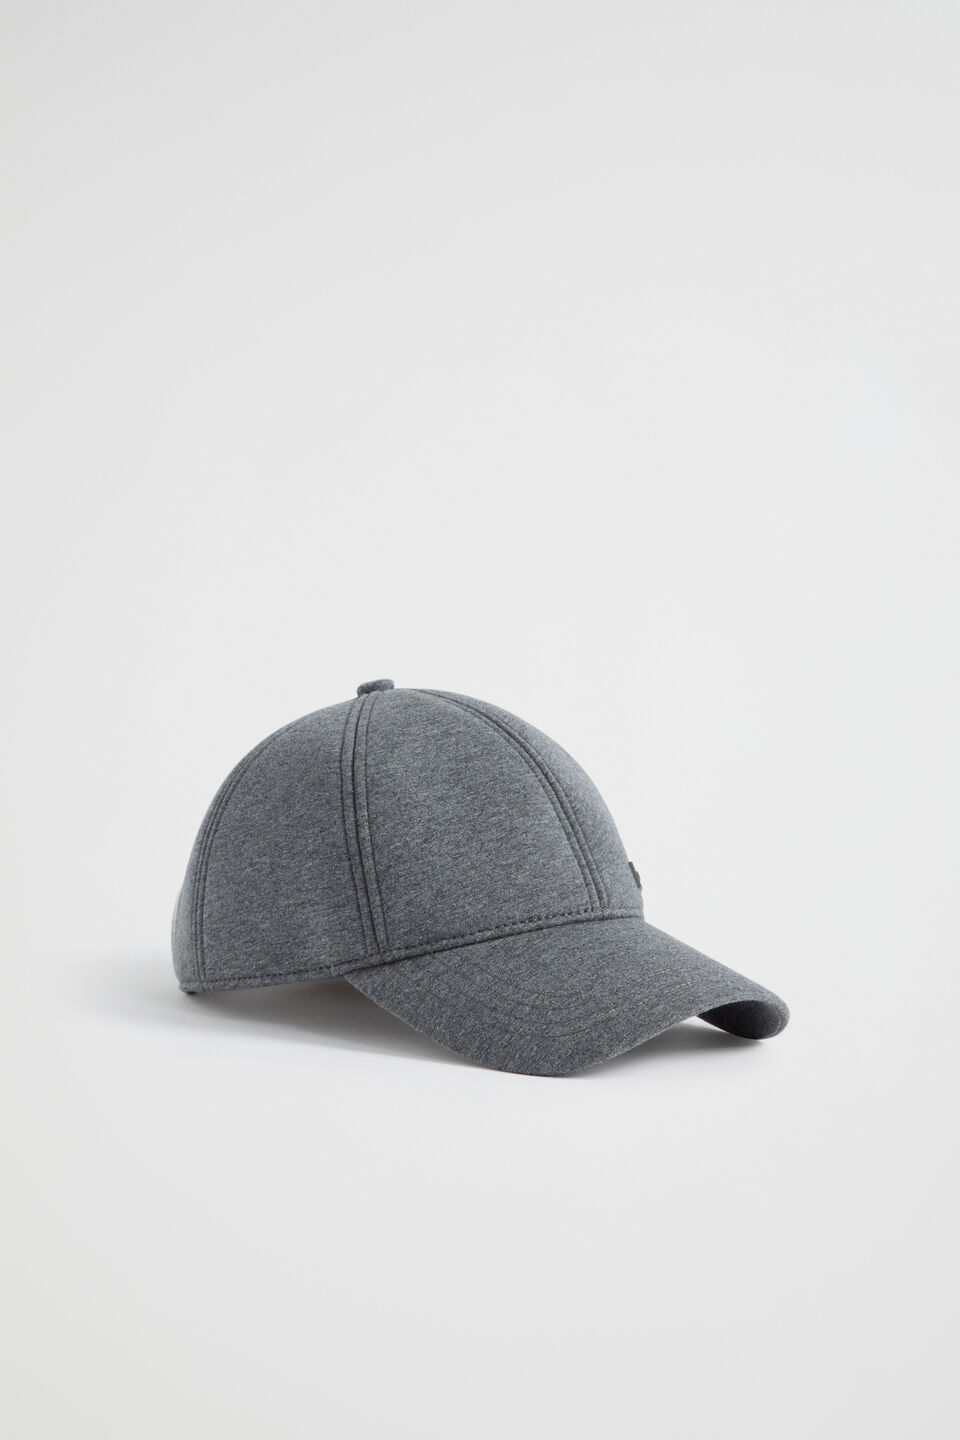 Seed Jersey Cap  Wolf Marle